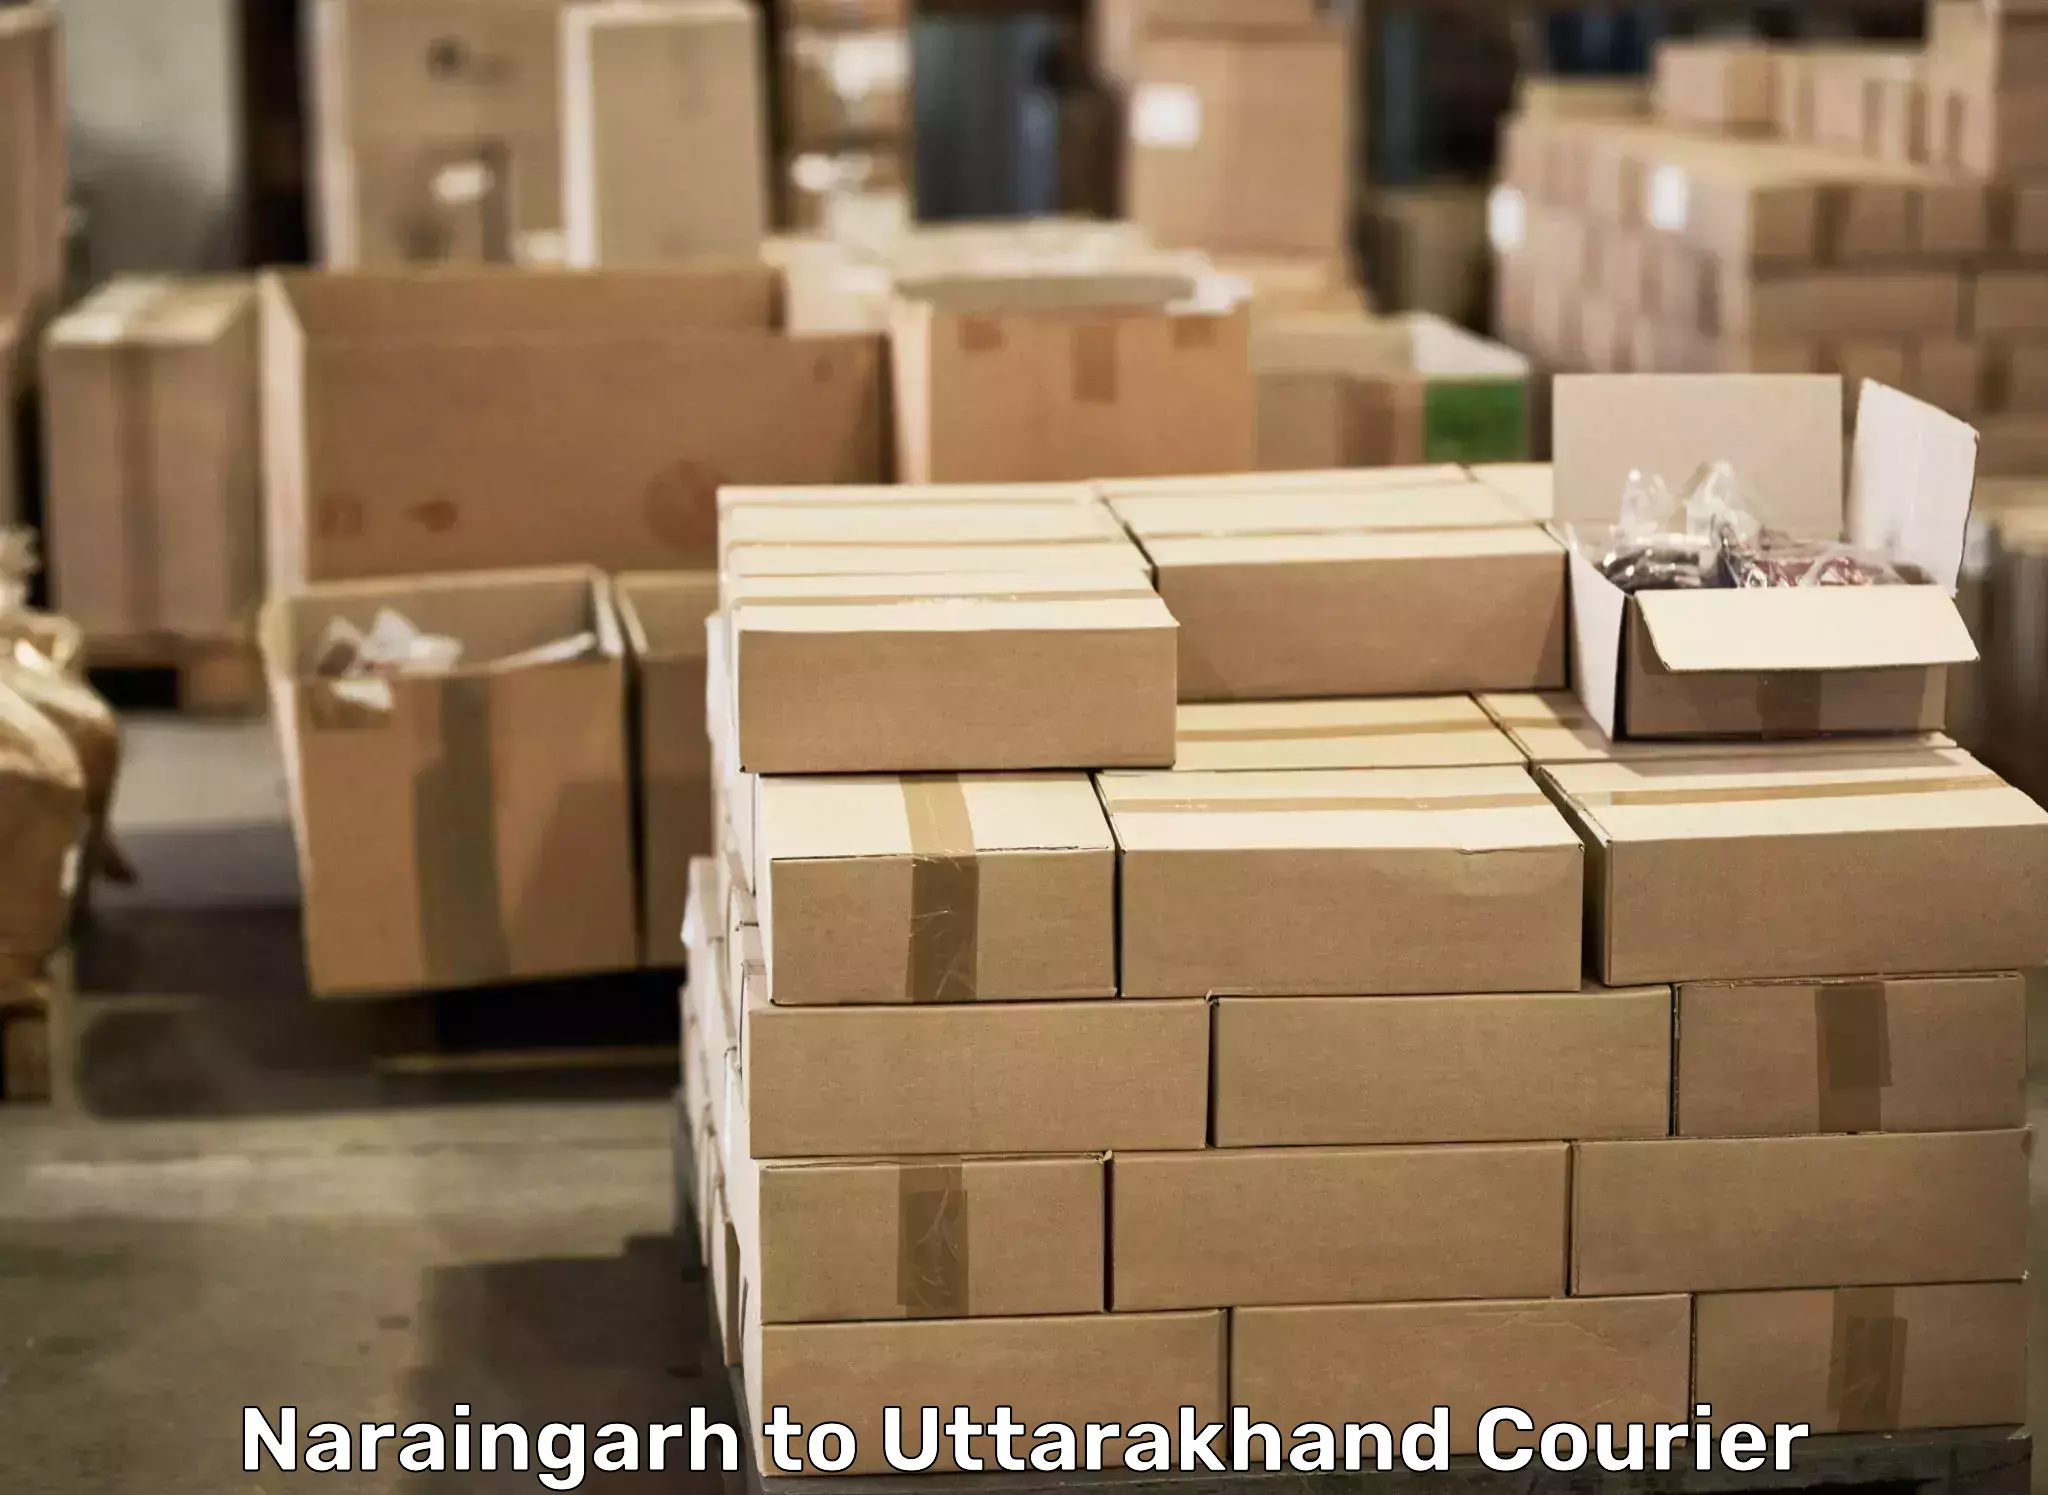 Moving and packing experts Naraingarh to Rudrapur